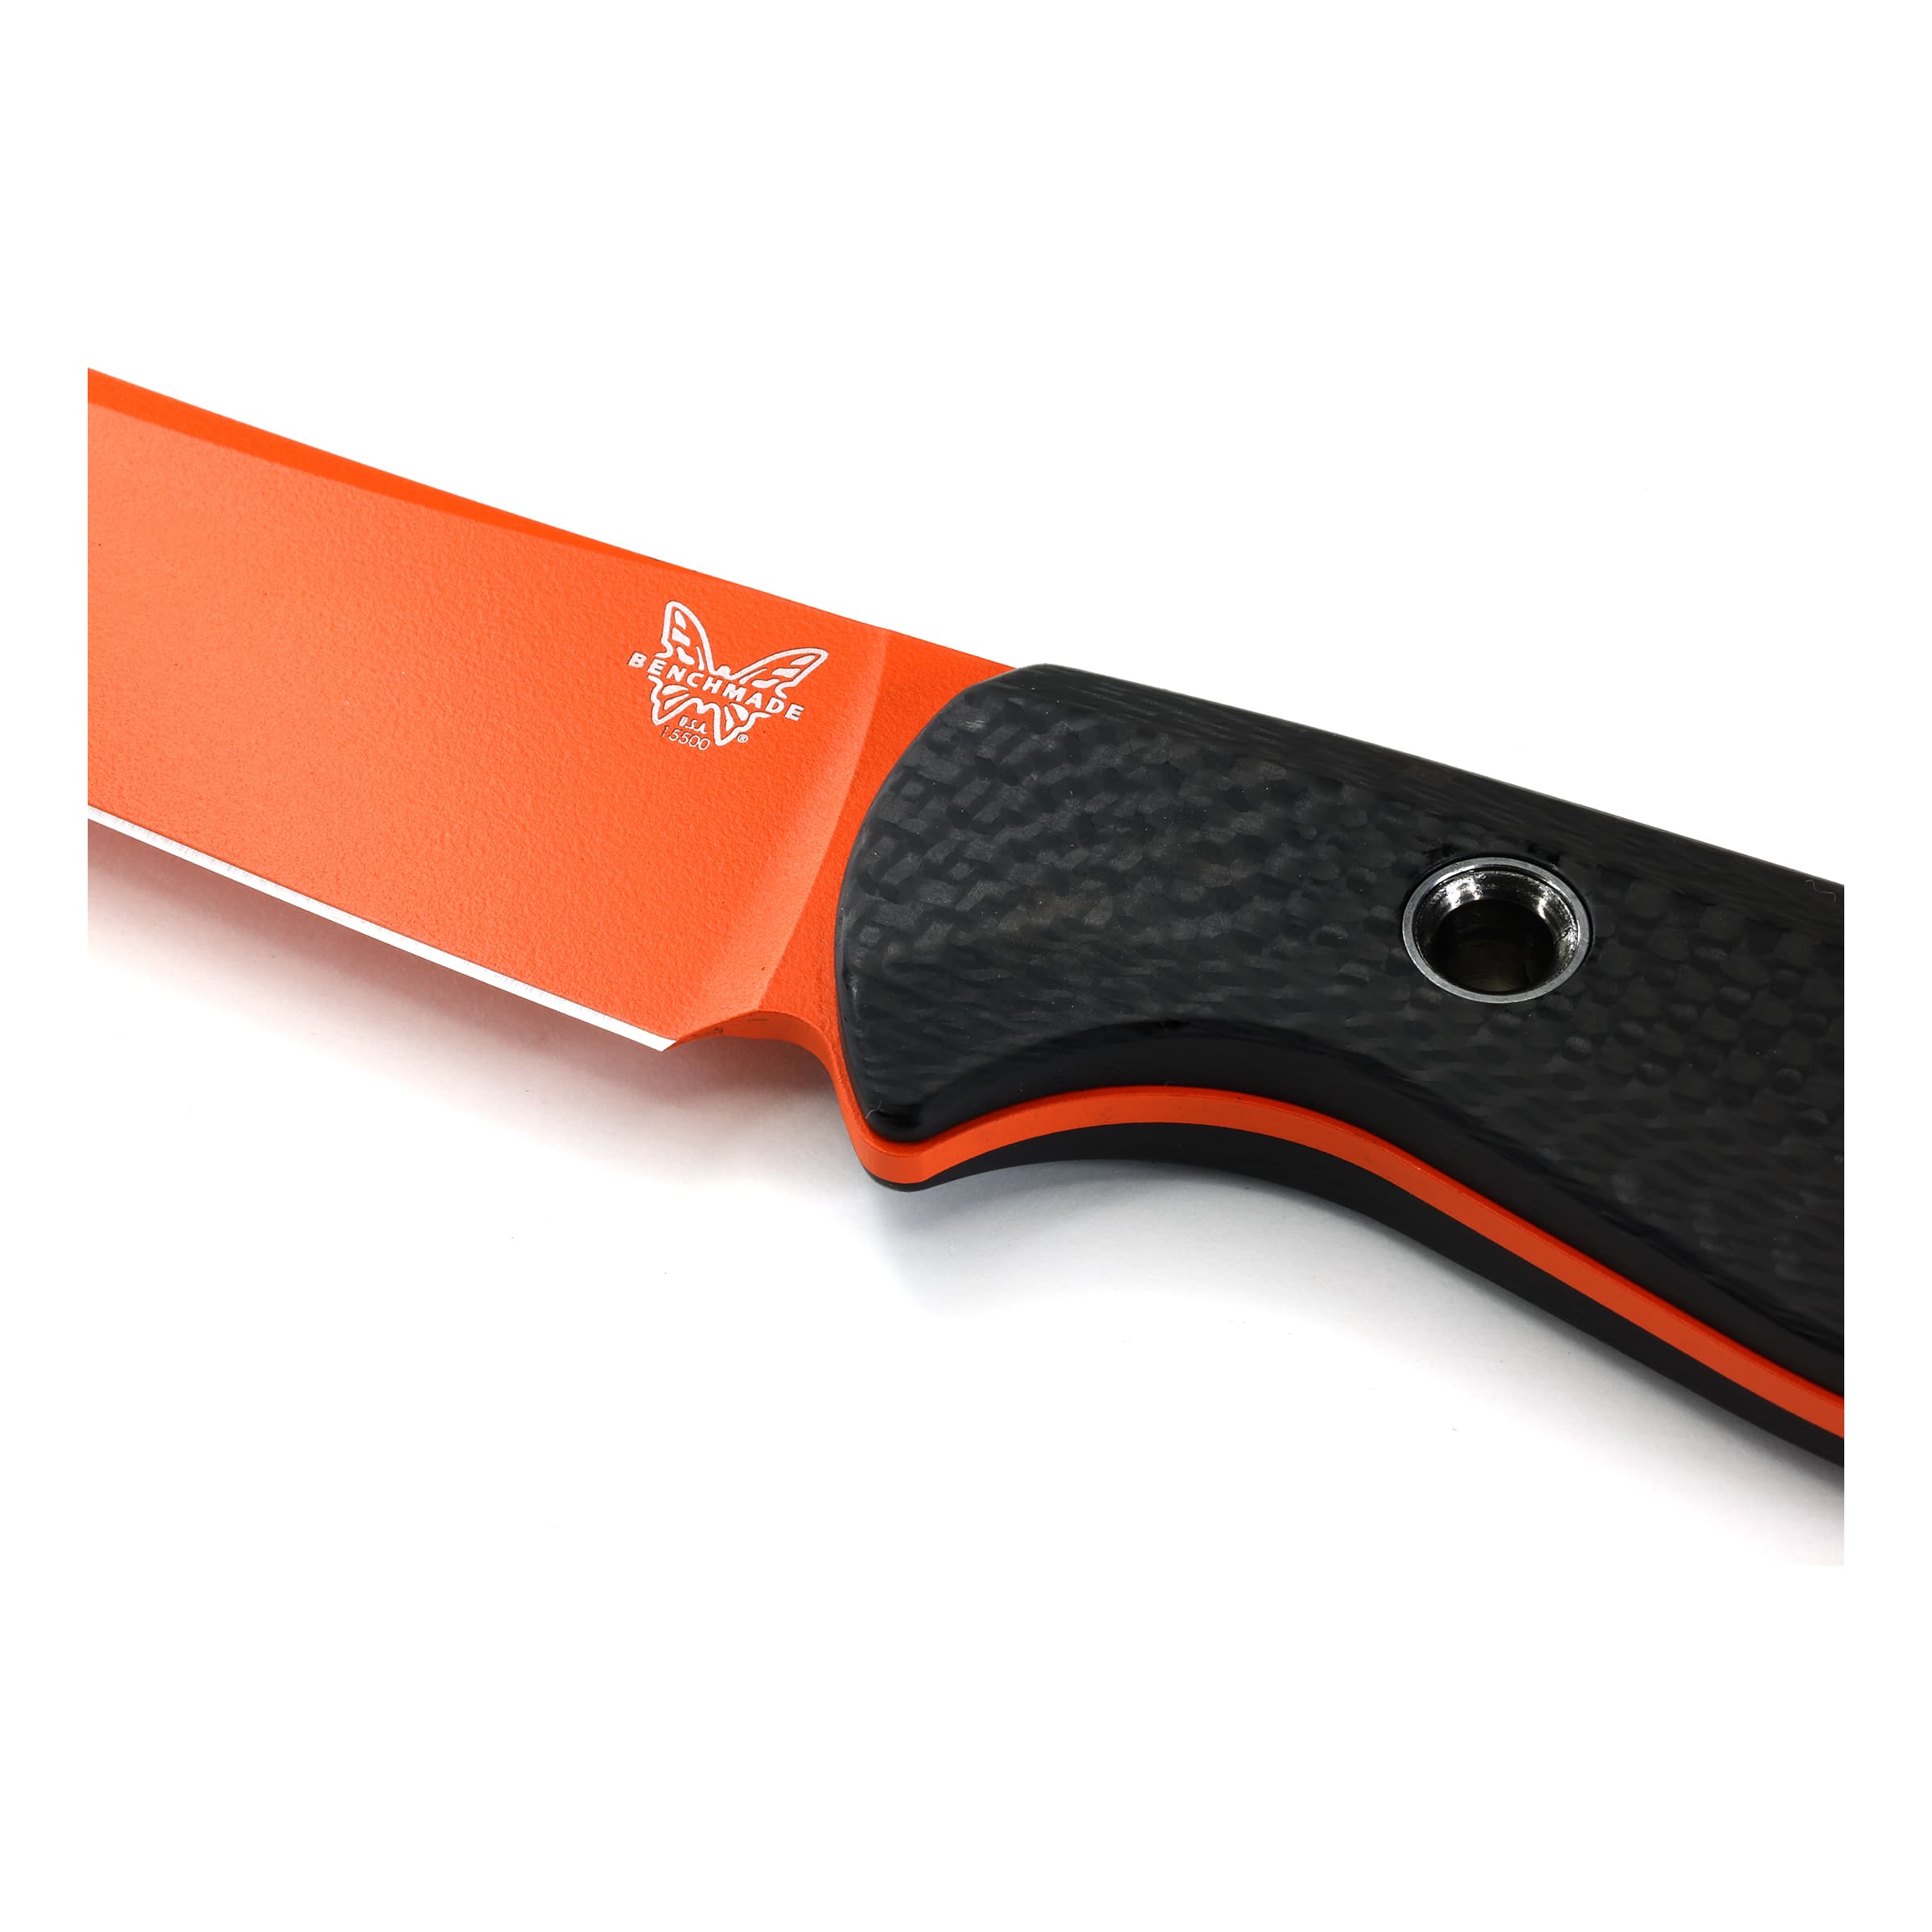 Benchmade® Meatcrafter® Fixed Blade Knife